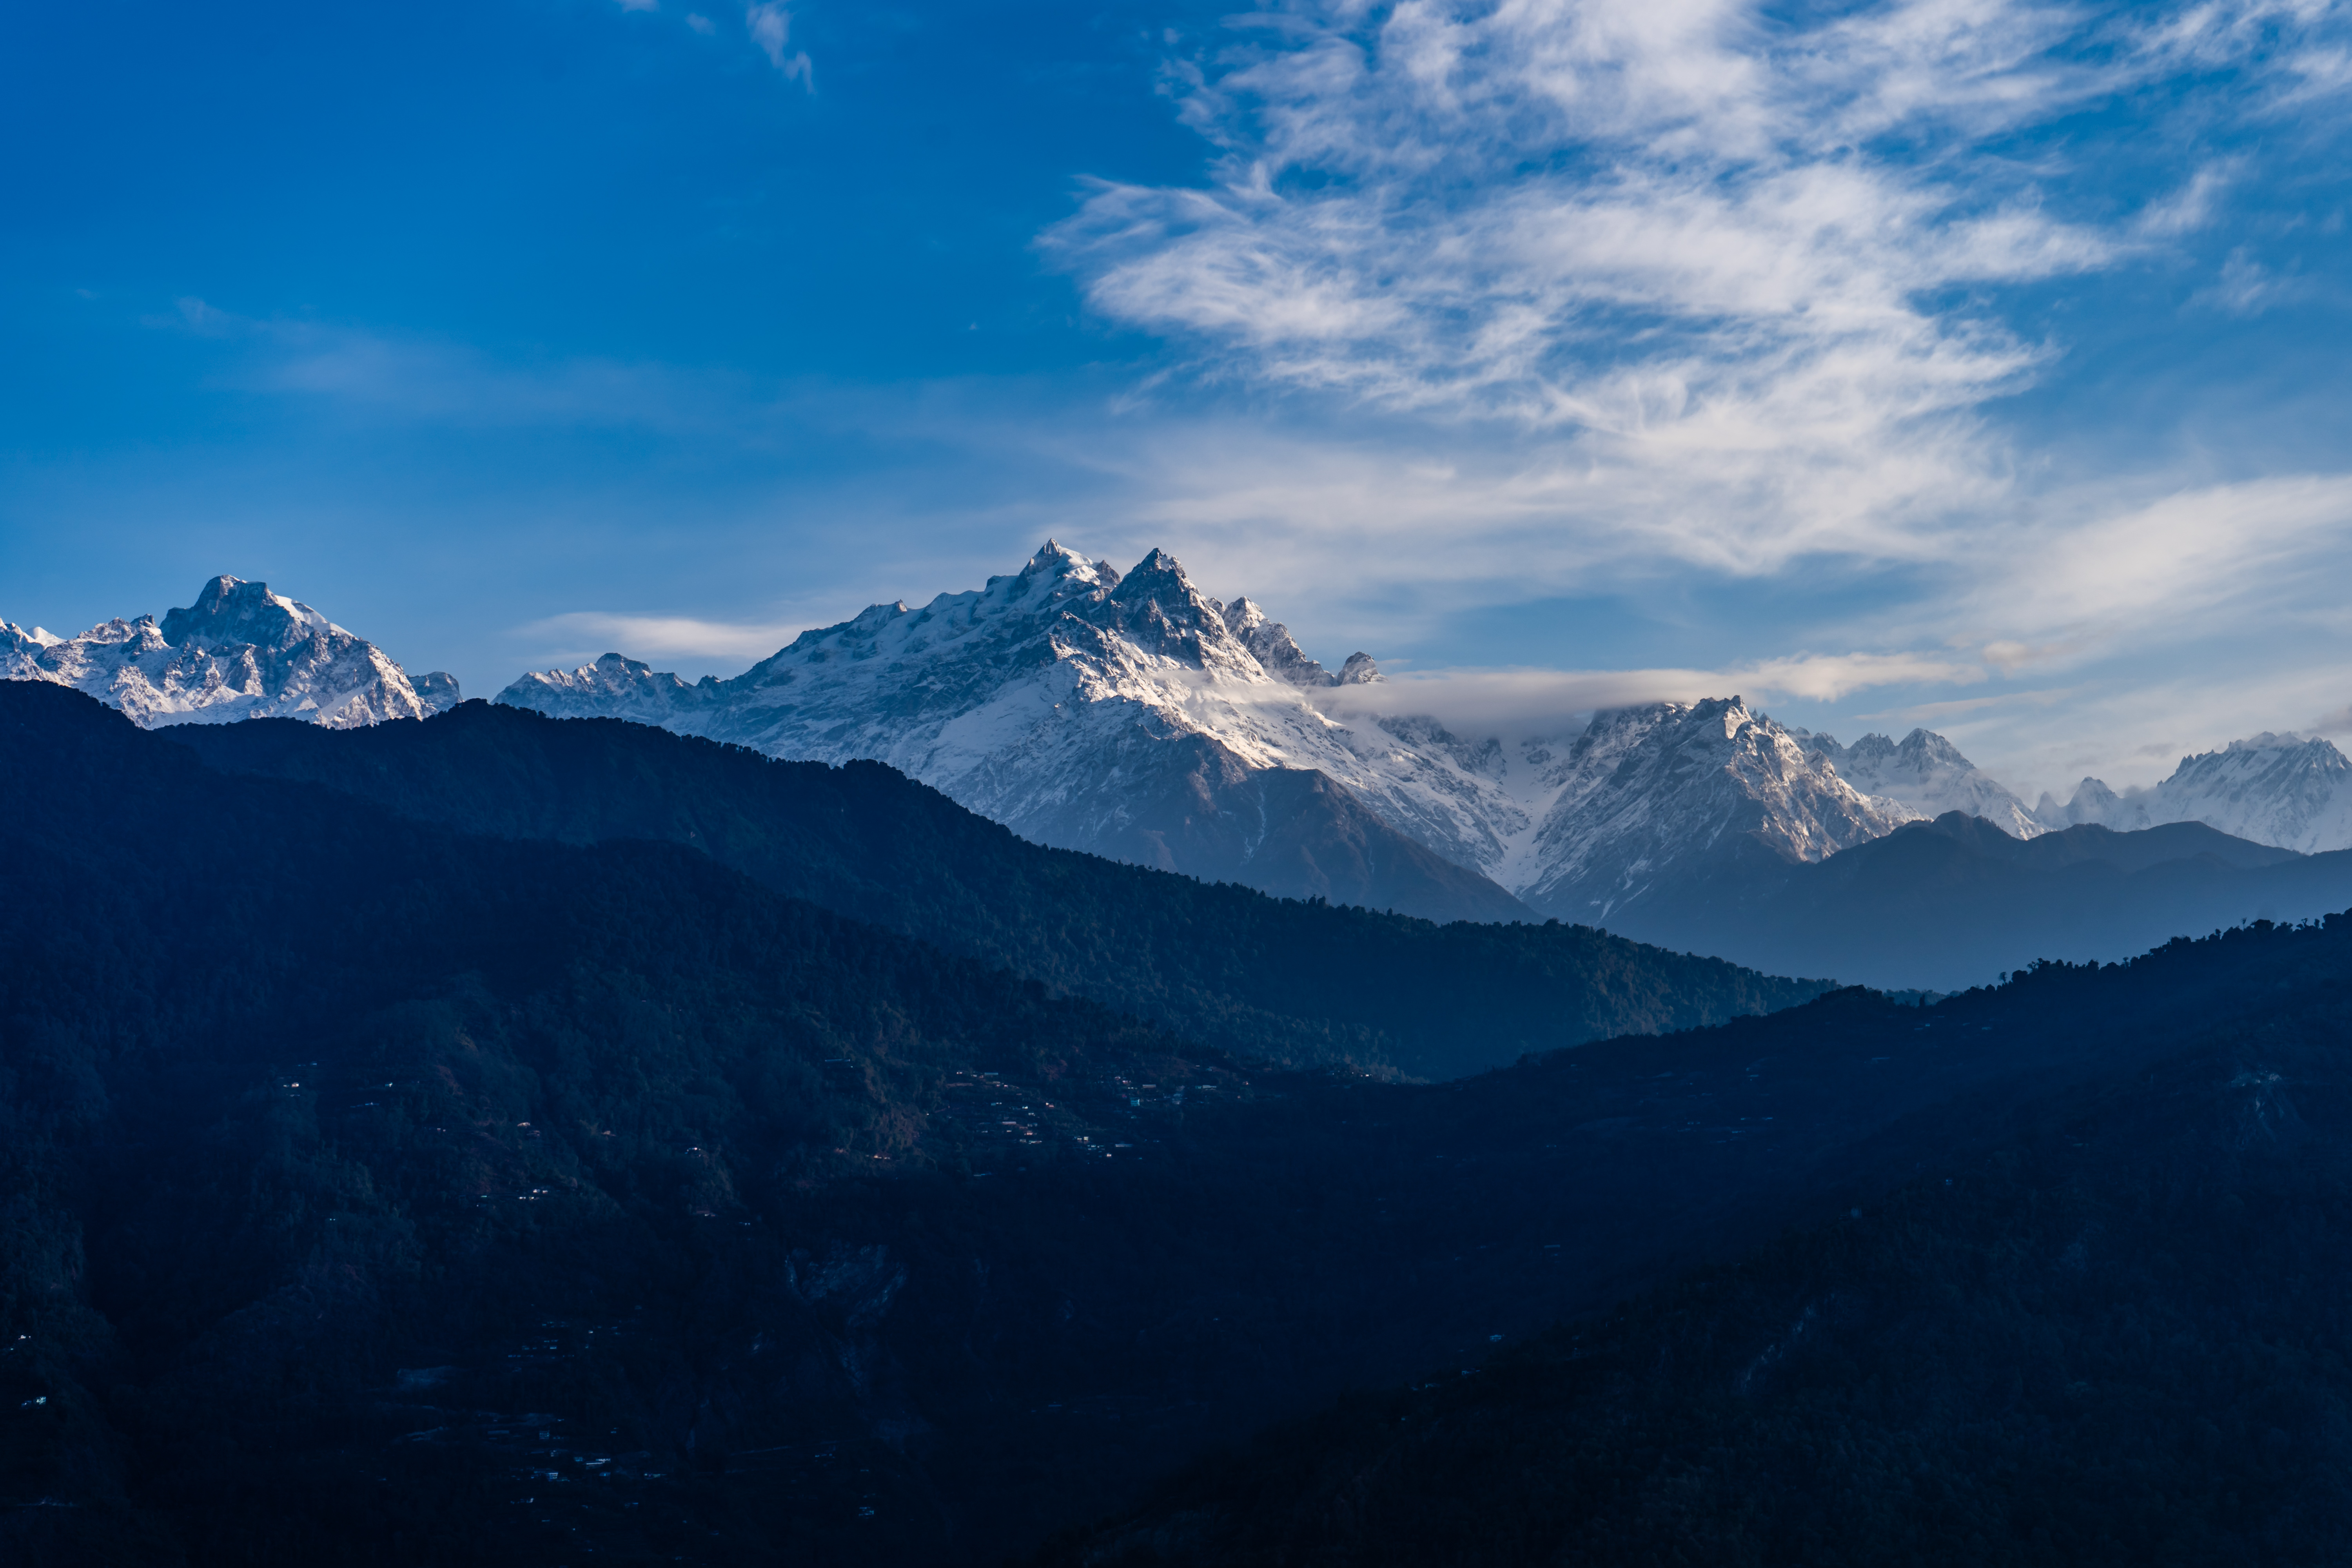 General 6000x4000 nature landscape mountains snow clouds sky trees forest Himalayas India